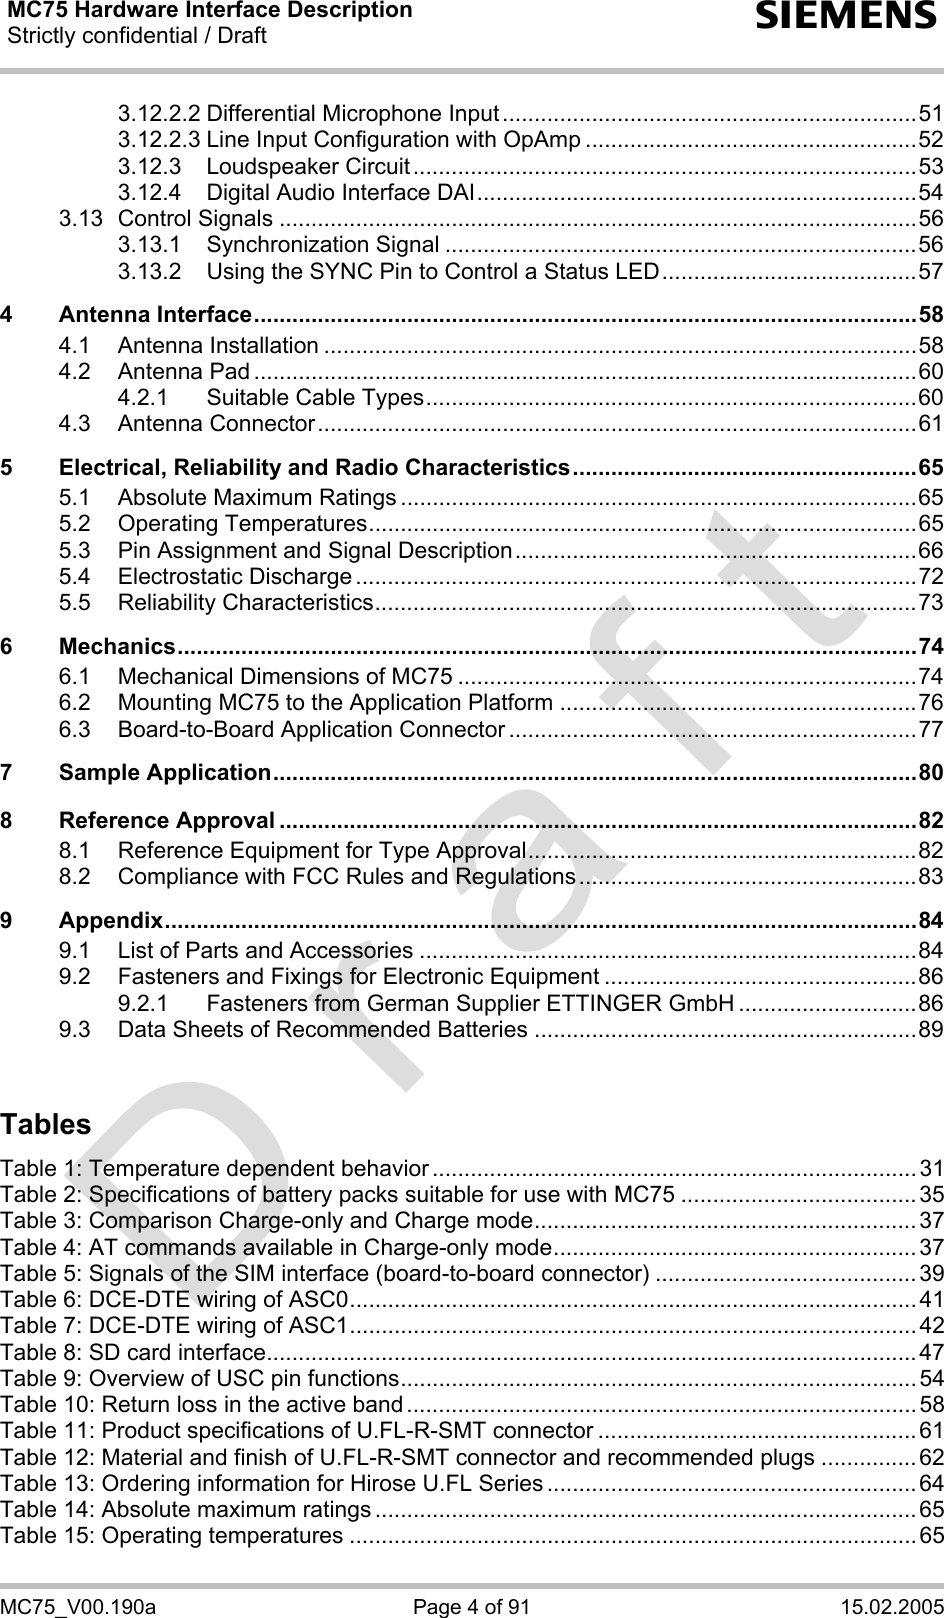 MC75 Hardware Interface Description Strictly confidential / Draft  s MC75_V00.190a  Page 4 of 91  15.02.2005 3.12.2.2 Differential Microphone Input.................................................................51 3.12.2.3 Line Input Configuration with OpAmp ....................................................52 3.12.3 Loudspeaker Circuit...............................................................................53 3.12.4 Digital Audio Interface DAI.....................................................................54 3.13 Control Signals ....................................................................................................56 3.13.1 Synchronization Signal ..........................................................................56 3.13.2 Using the SYNC Pin to Control a Status LED........................................57 4 Antenna Interface........................................................................................................58 4.1 Antenna Installation .............................................................................................58 4.2 Antenna Pad ........................................................................................................60 4.2.1 Suitable Cable Types.............................................................................60 4.3 Antenna Connector..............................................................................................61 5 Electrical, Reliability and Radio Characteristics......................................................65 5.1 Absolute Maximum Ratings .................................................................................65 5.2 Operating Temperatures......................................................................................65 5.3 Pin Assignment and Signal Description...............................................................66 5.4 Electrostatic Discharge ........................................................................................72 5.5 Reliability Characteristics.....................................................................................73 6 Mechanics....................................................................................................................74 6.1 Mechanical Dimensions of MC75 ........................................................................74 6.2 Mounting MC75 to the Application Platform ........................................................76 6.3 Board-to-Board Application Connector ................................................................77 7 Sample Application.....................................................................................................80 8 Reference Approval ....................................................................................................82 8.1 Reference Equipment for Type Approval.............................................................82 8.2 Compliance with FCC Rules and Regulations.....................................................83 9 Appendix......................................................................................................................84 9.1 List of Parts and Accessories ..............................................................................84 9.2 Fasteners and Fixings for Electronic Equipment .................................................86 9.2.1 Fasteners from German Supplier ETTINGER GmbH ............................86 9.3 Data Sheets of Recommended Batteries ............................................................89  Tables  Table 1: Temperature dependent behavior ............................................................................ 31 Table 2: Specifications of battery packs suitable for use with MC75 ..................................... 35 Table 3: Comparison Charge-only and Charge mode............................................................ 37 Table 4: AT commands available in Charge-only mode......................................................... 37 Table 5: Signals of the SIM interface (board-to-board connector) ......................................... 39 Table 6: DCE-DTE wiring of ASC0......................................................................................... 41 Table 7: DCE-DTE wiring of ASC1......................................................................................... 42 Table 8: SD card interface......................................................................................................47 Table 9: Overview of USC pin functions................................................................................. 54 Table 10: Return loss in the active band ................................................................................58 Table 11: Product specifications of U.FL-R-SMT connector .................................................. 61 Table 12: Material and finish of U.FL-R-SMT connector and recommended plugs ...............62 Table 13: Ordering information for Hirose U.FL Series .......................................................... 64 Table 14: Absolute maximum ratings ..................................................................................... 65 Table 15: Operating temperatures ......................................................................................... 65 